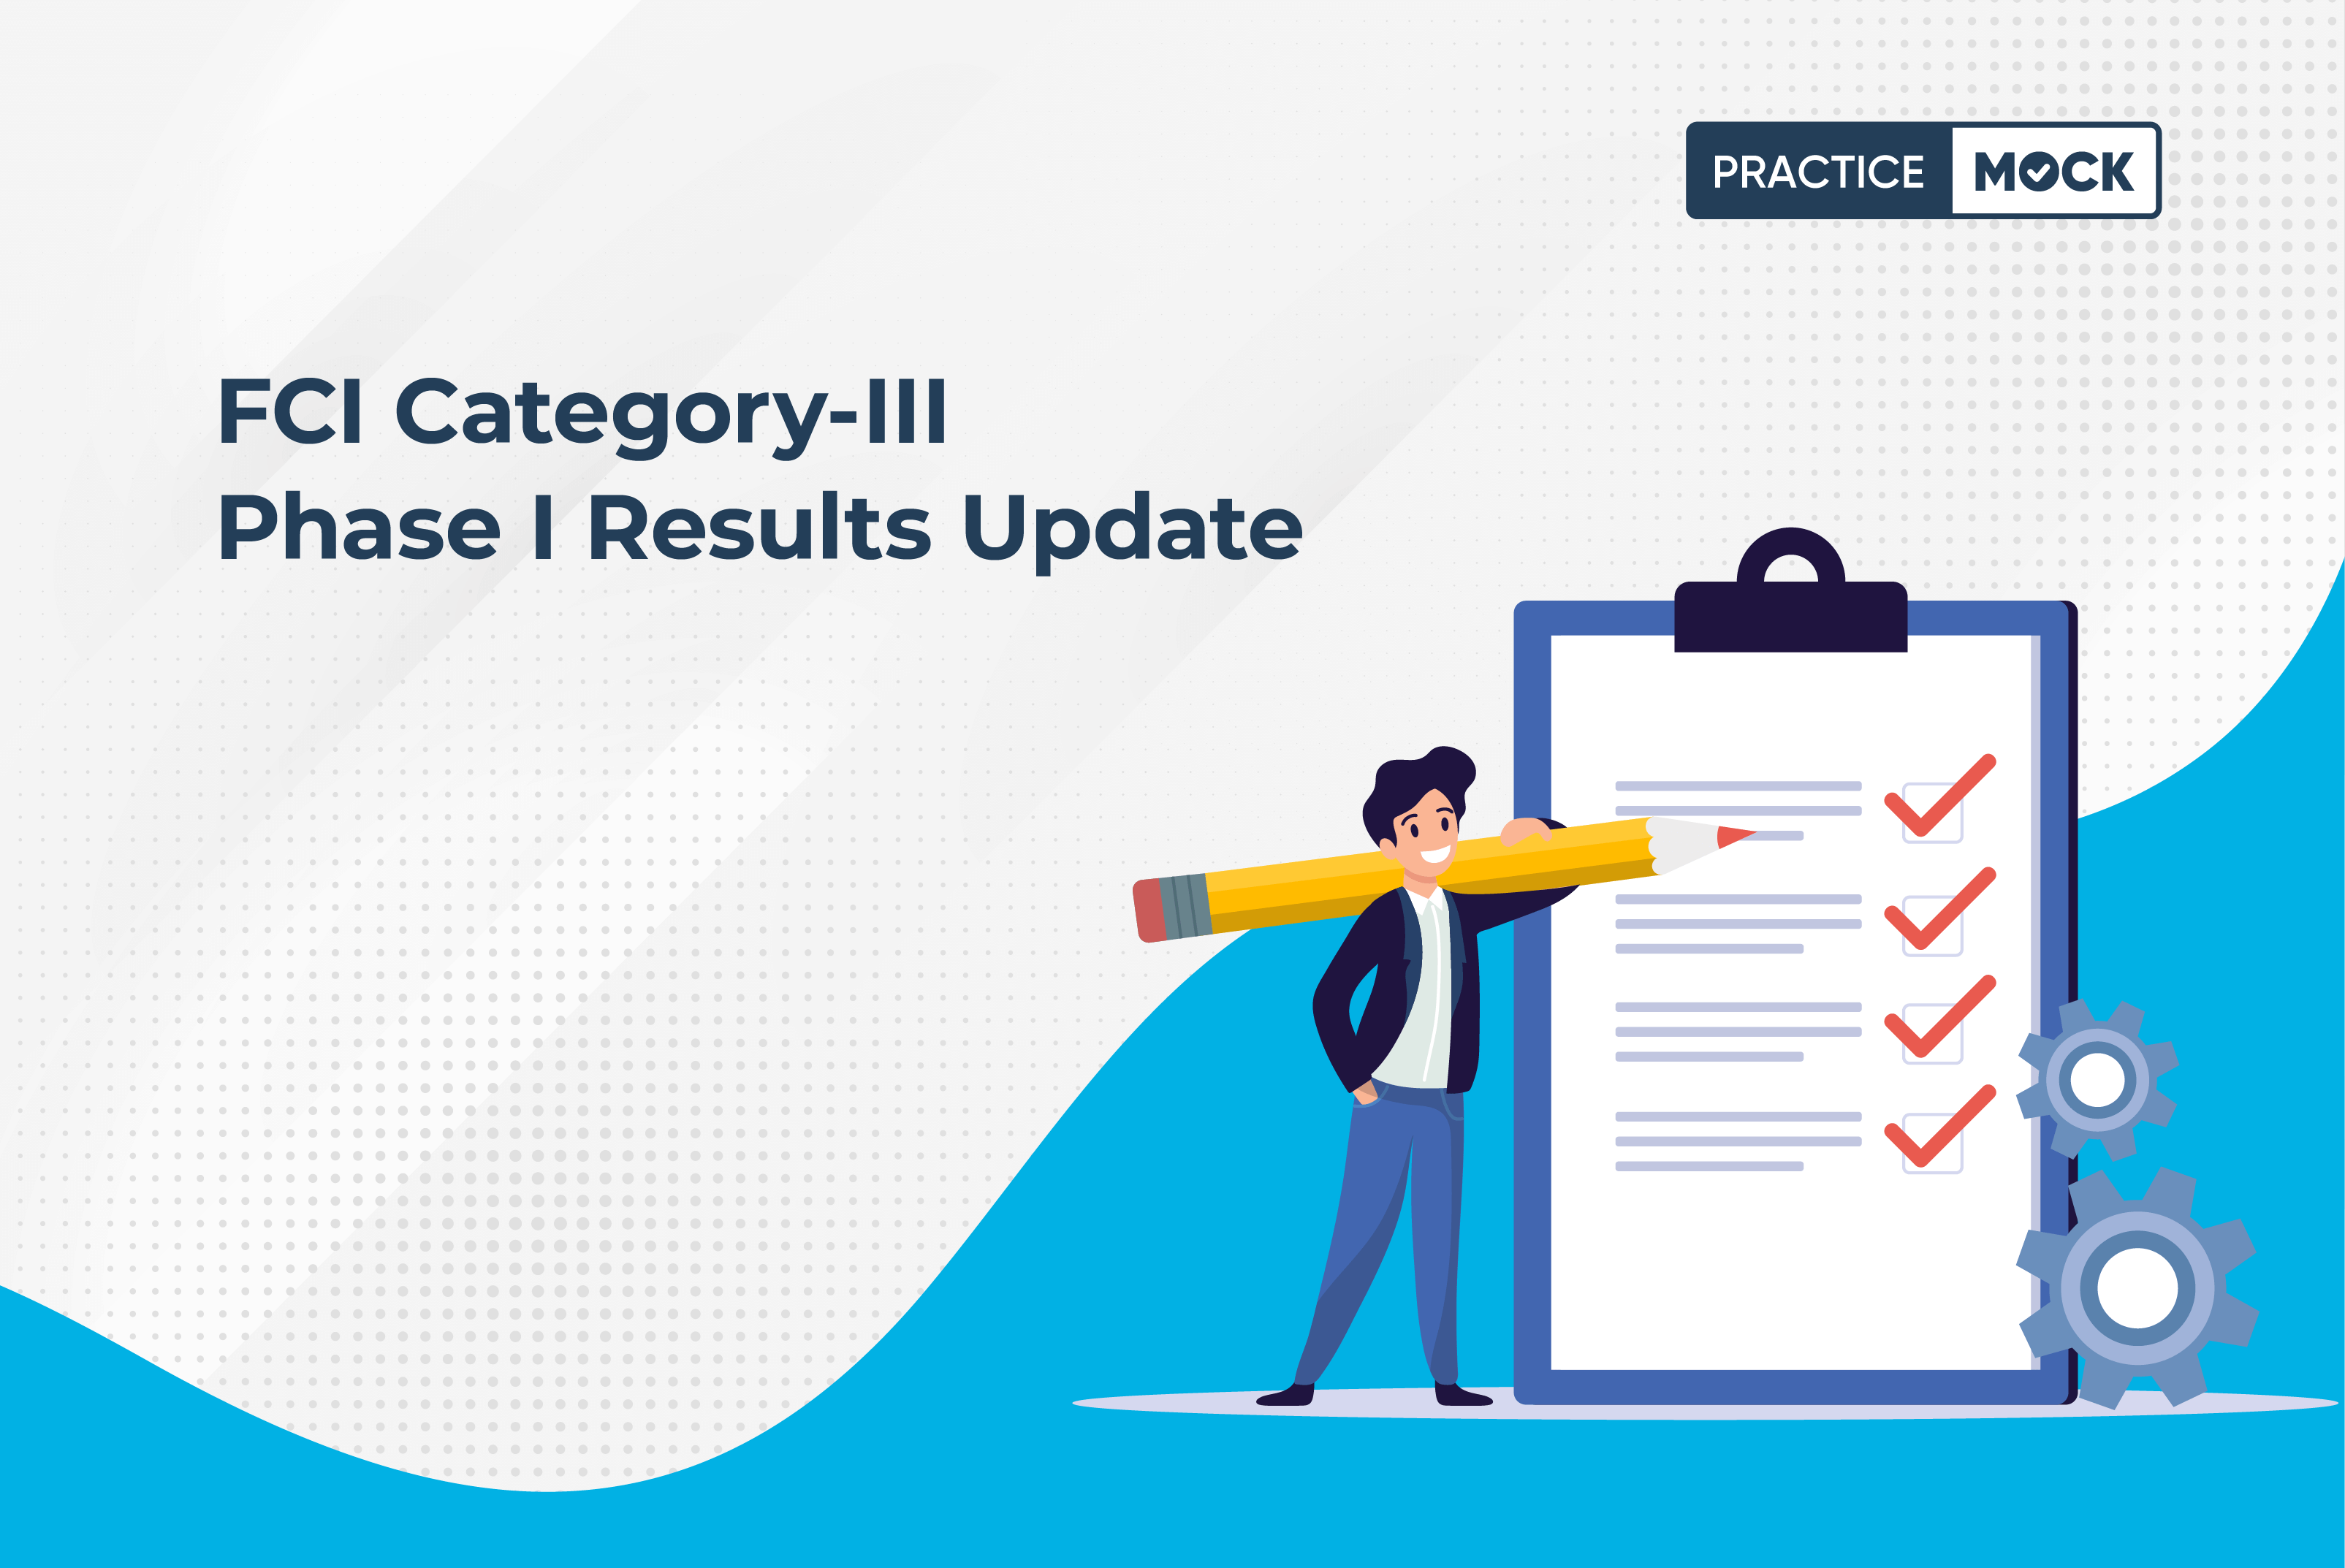 FCI Category-III Phase I Results Update